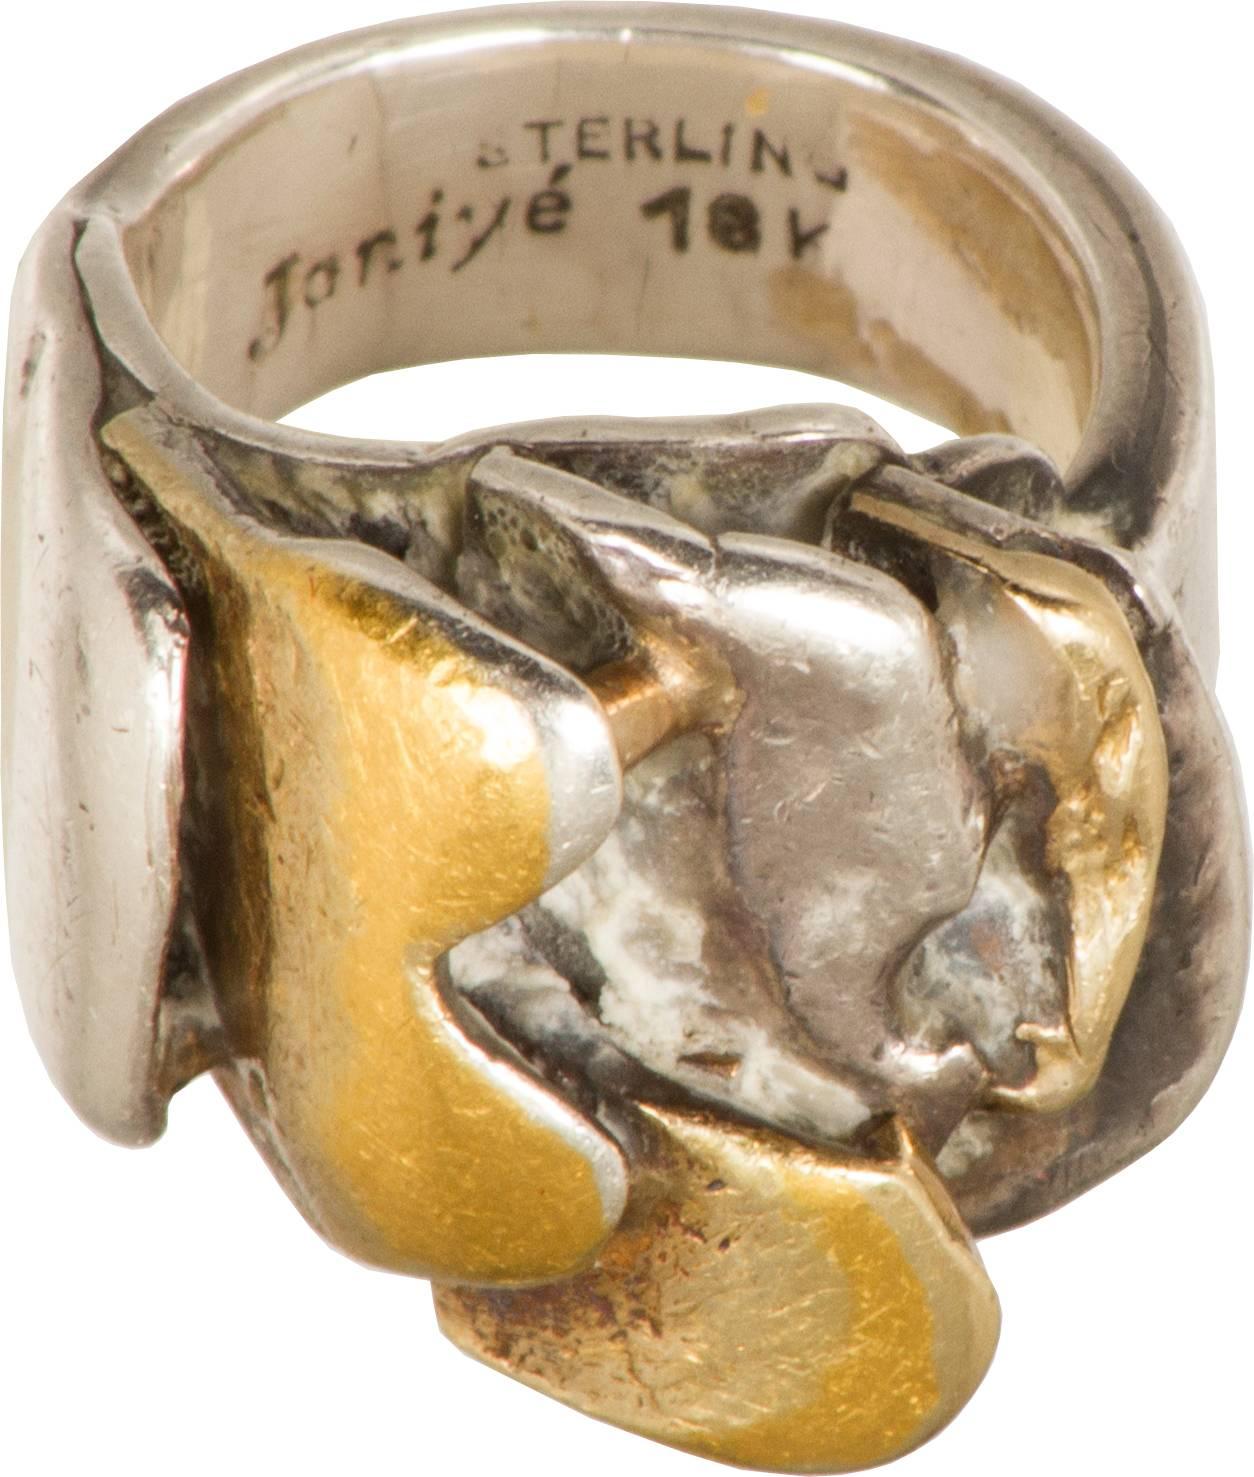 The Co-founder of Ateller Jainye, Miye Matsuka made this fabulous textural ring, marrying gold and silver in an incredible brutal design.

This ring is a size 2.